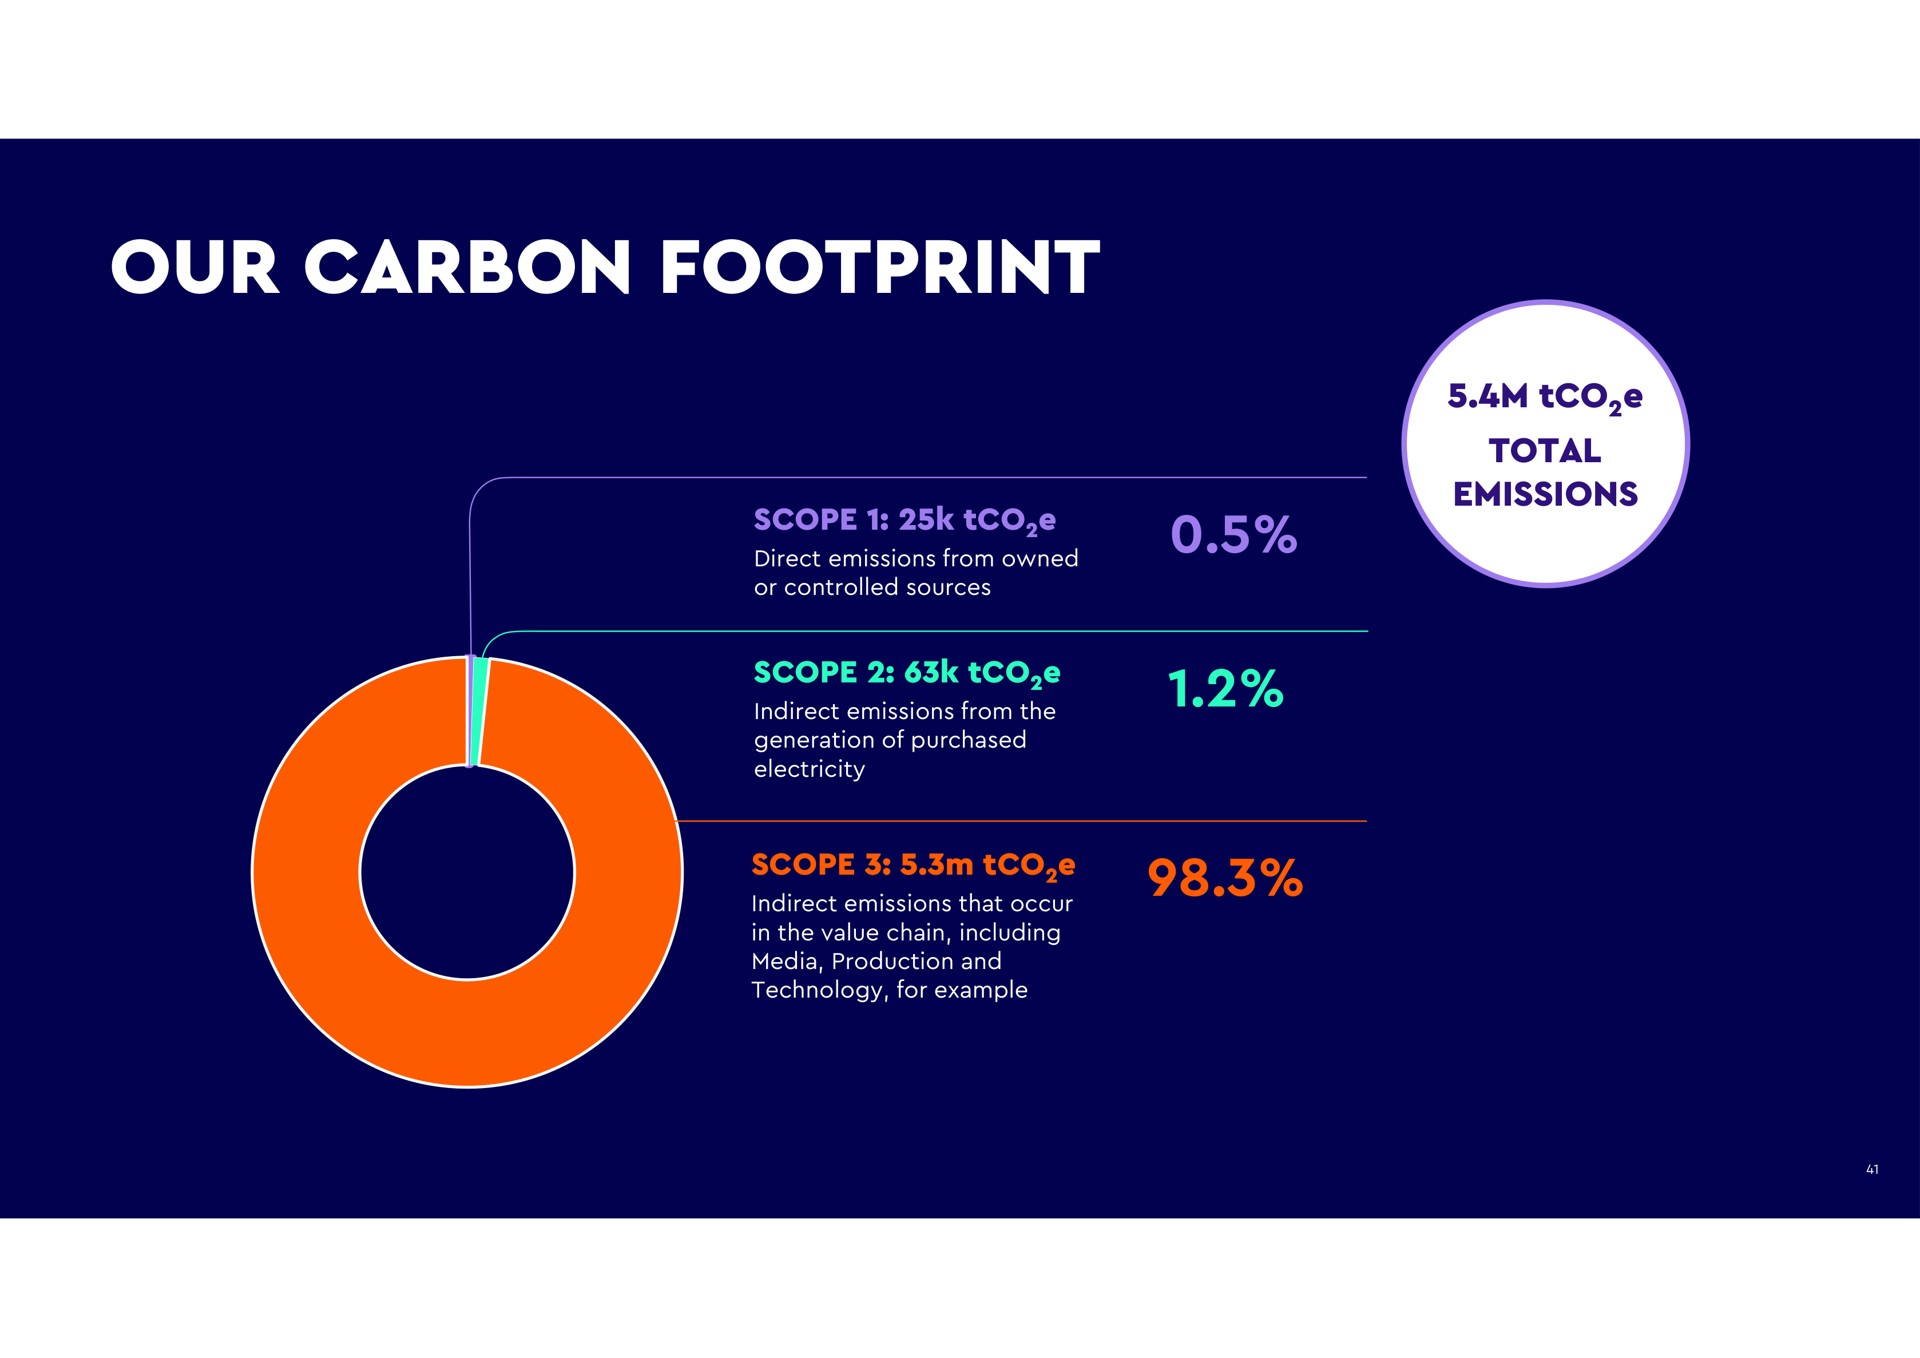 our carbon footprint total emissions scope direct emissions from owned or controlled sources scope indirect emissions from the generation of purchased electricity scope indirect emissions that occur in the value chain including media production and technology for example | WPP